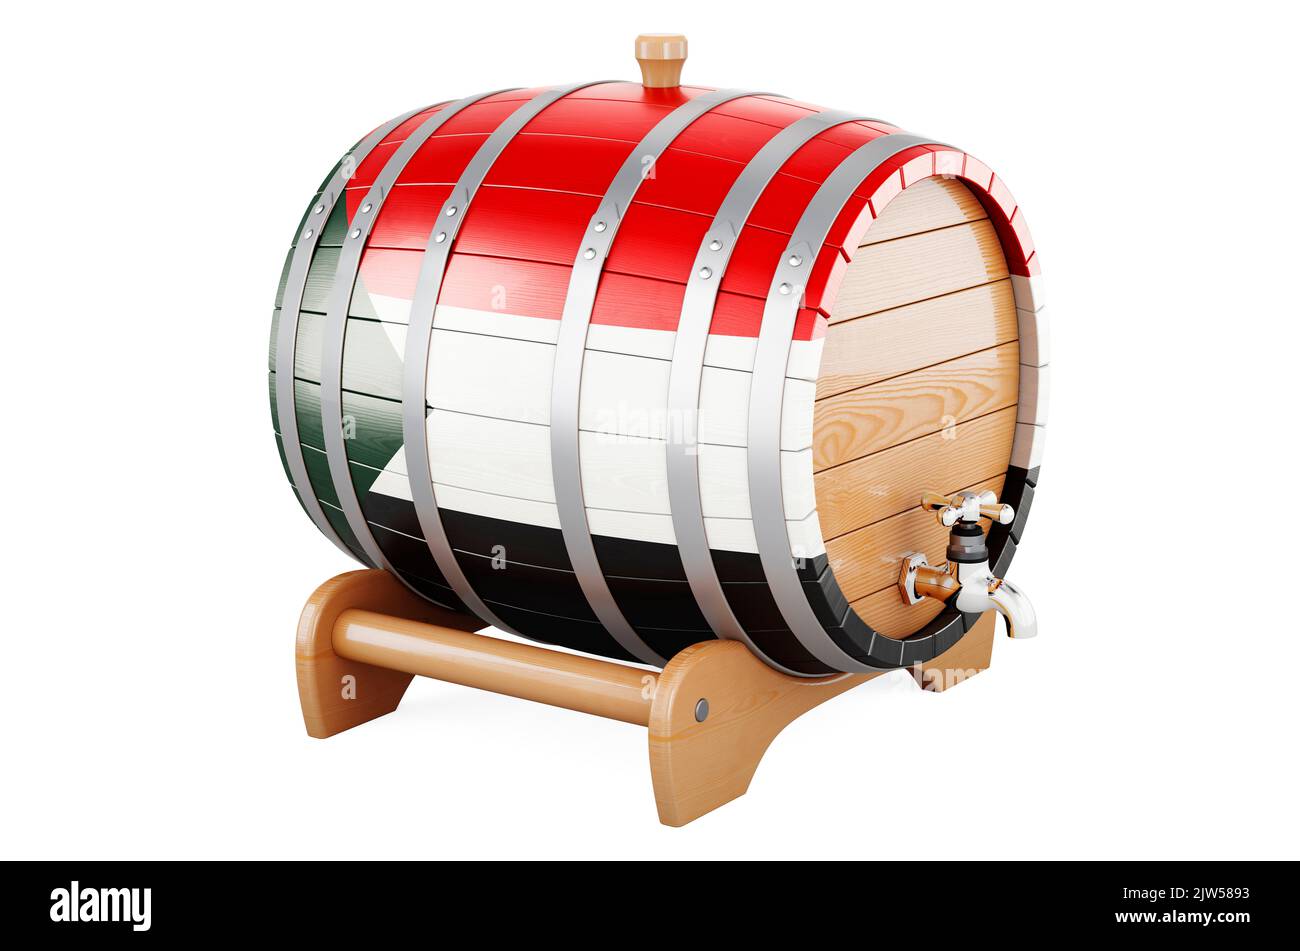 Wooden barrel with Sudanese flag, 3D rendering isolated on white background Stock Photo